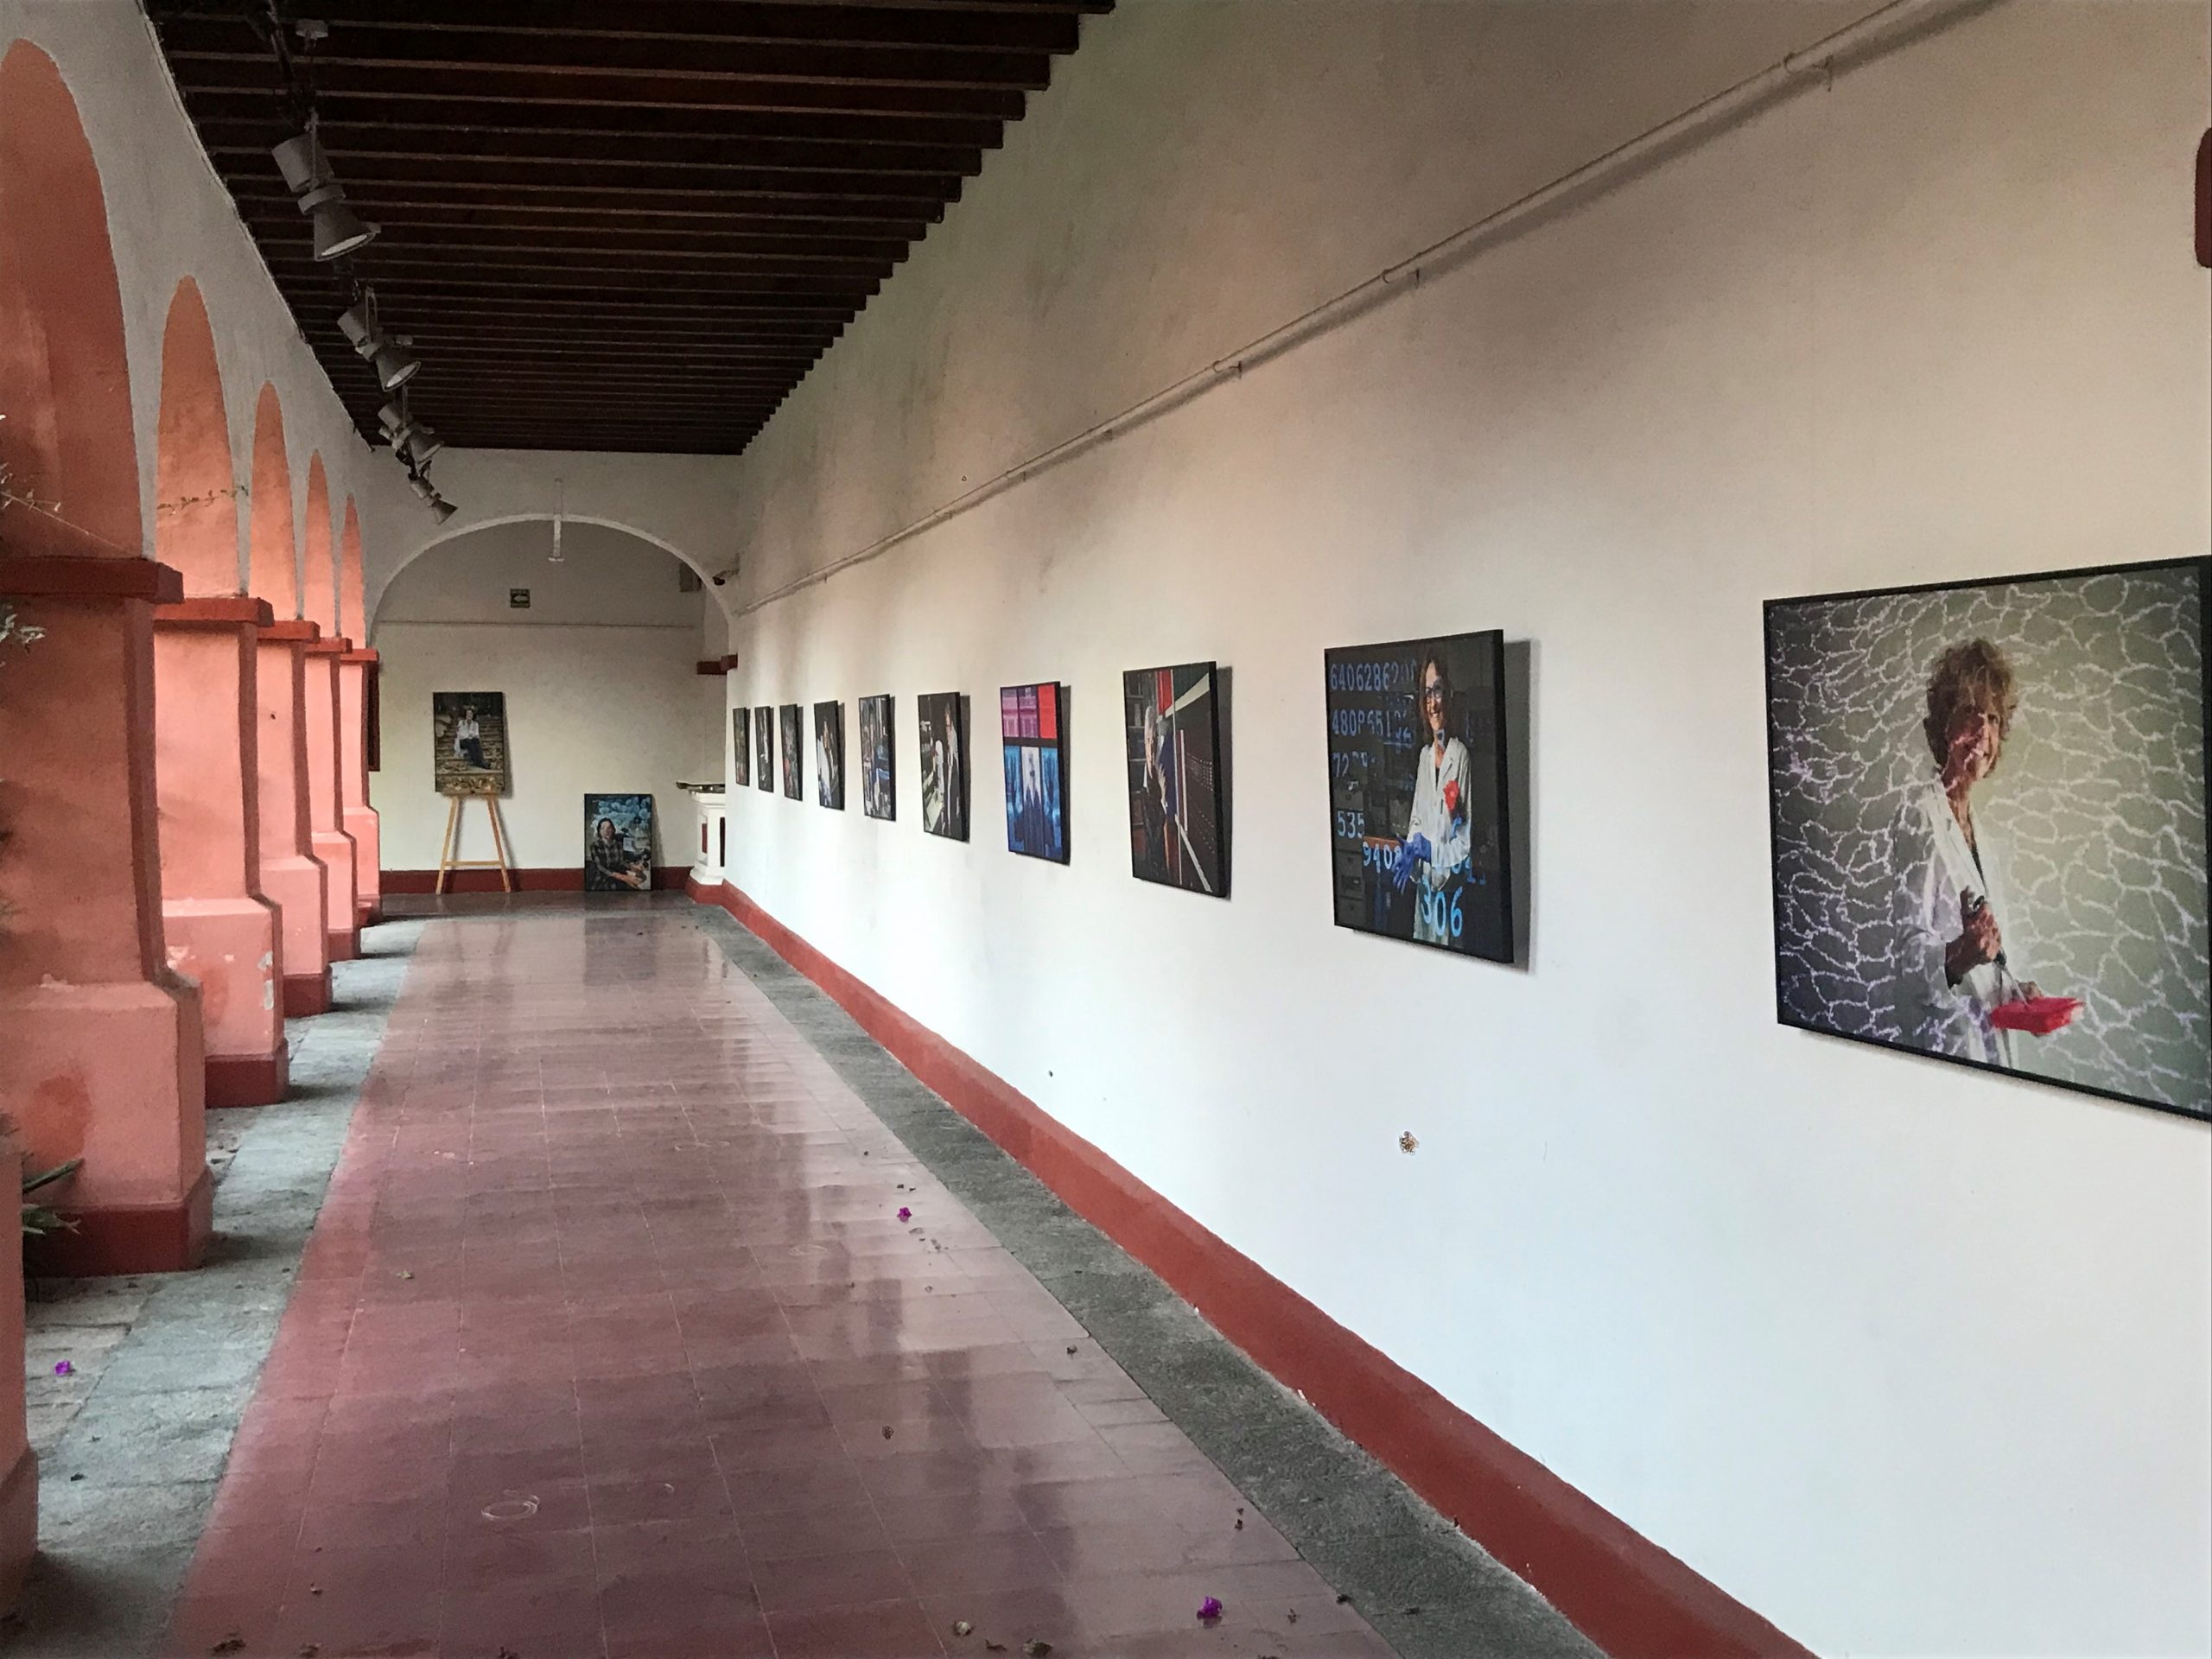 “Life as a scientist” exhibition in Mexico City